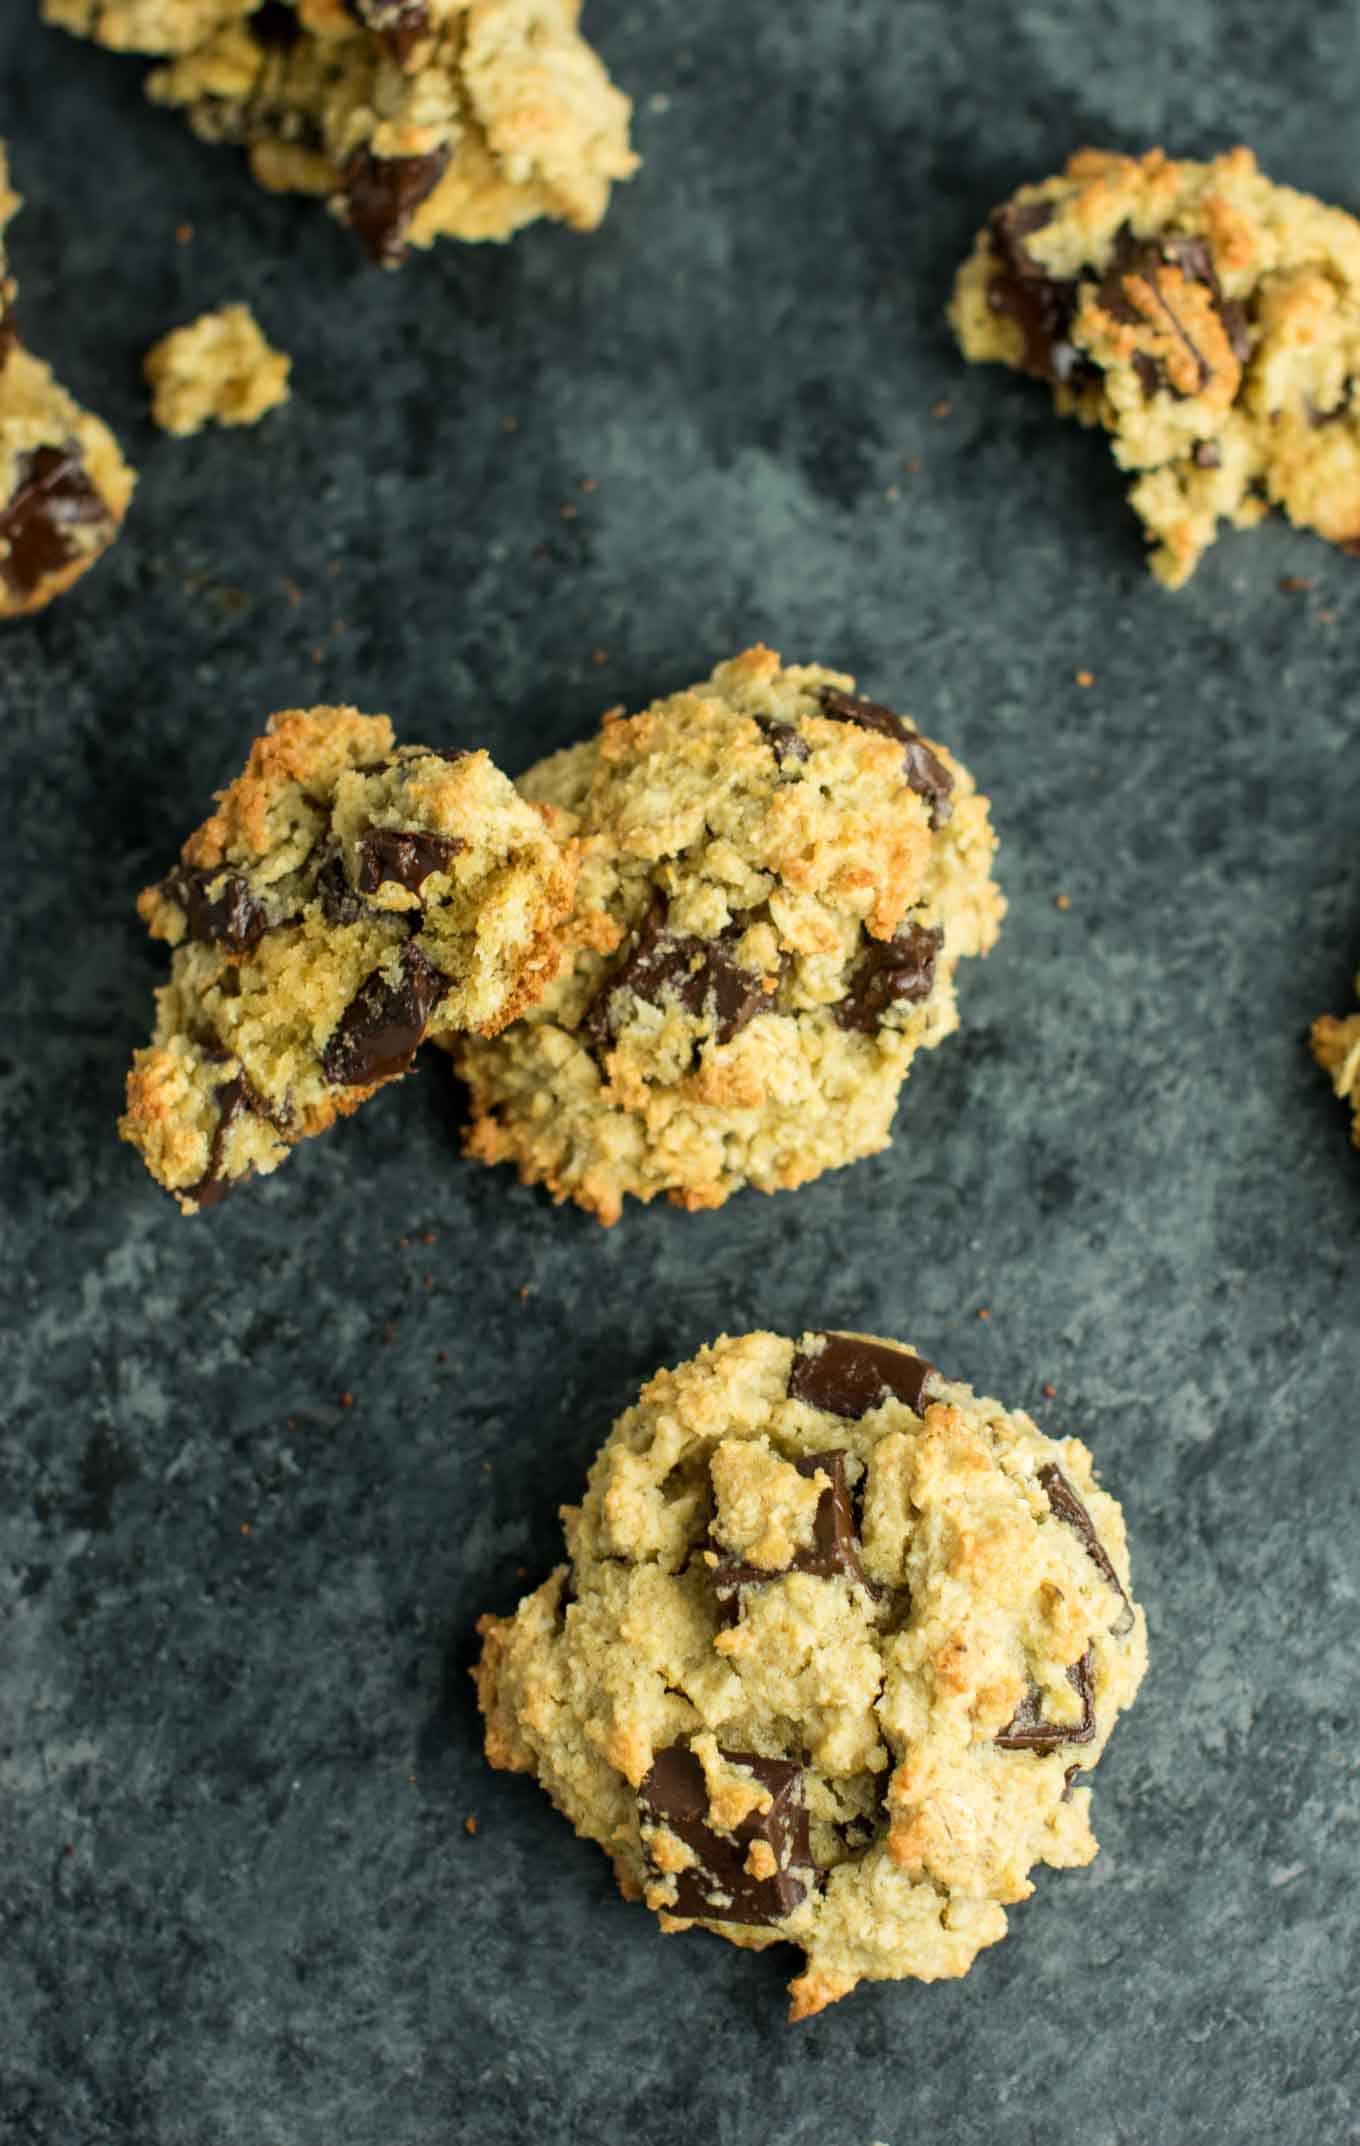 Gluten Free Oatmeal Chocolate Chip Cookies recipe made with oat flour and coconut flour. An easy, healthy, and delicious cookie recipe made using easy to find and inexpensive gluten free flours. #glutenfree #oatmealchocolatechip #healthy #cookies